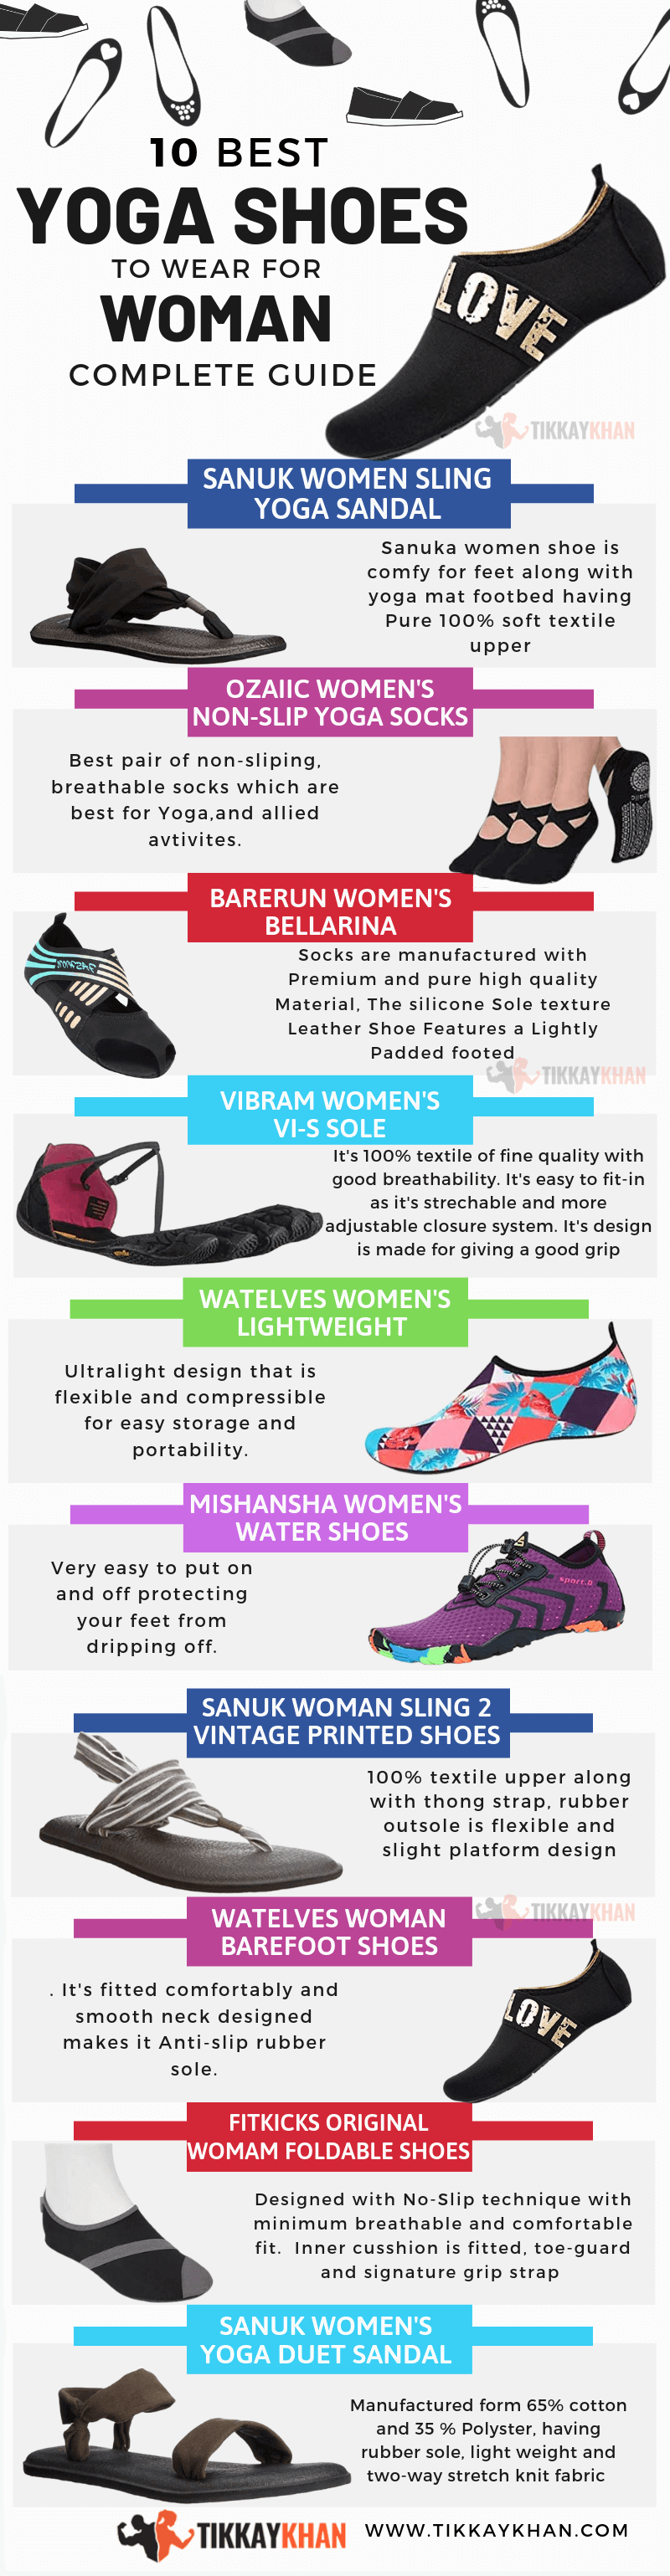 Yoga shoes infographic